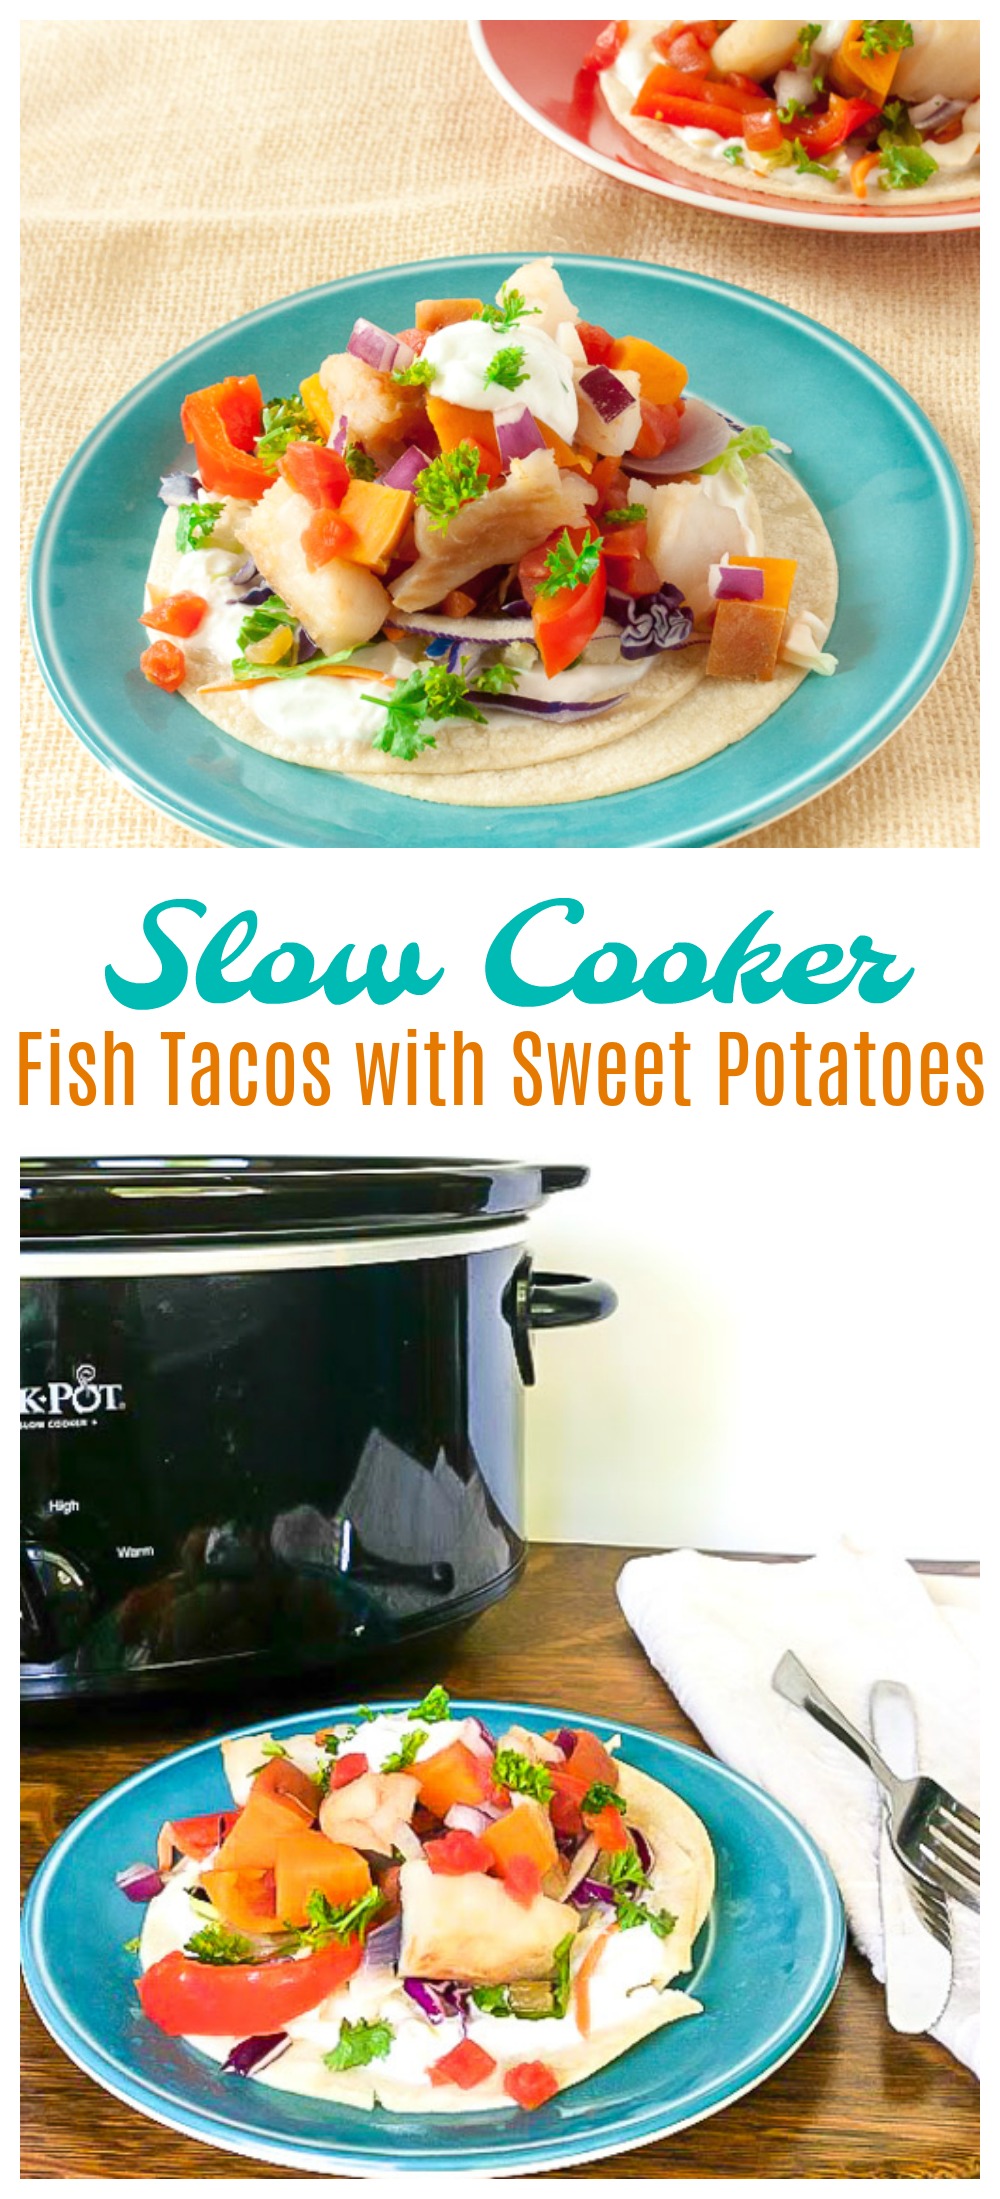 Perfectly cooked fish every time: SLOW COOKER FISH TACOS WITH SWEET POTATOES | @TspCurry - More healthy recipes at Teaspoonofspice.com